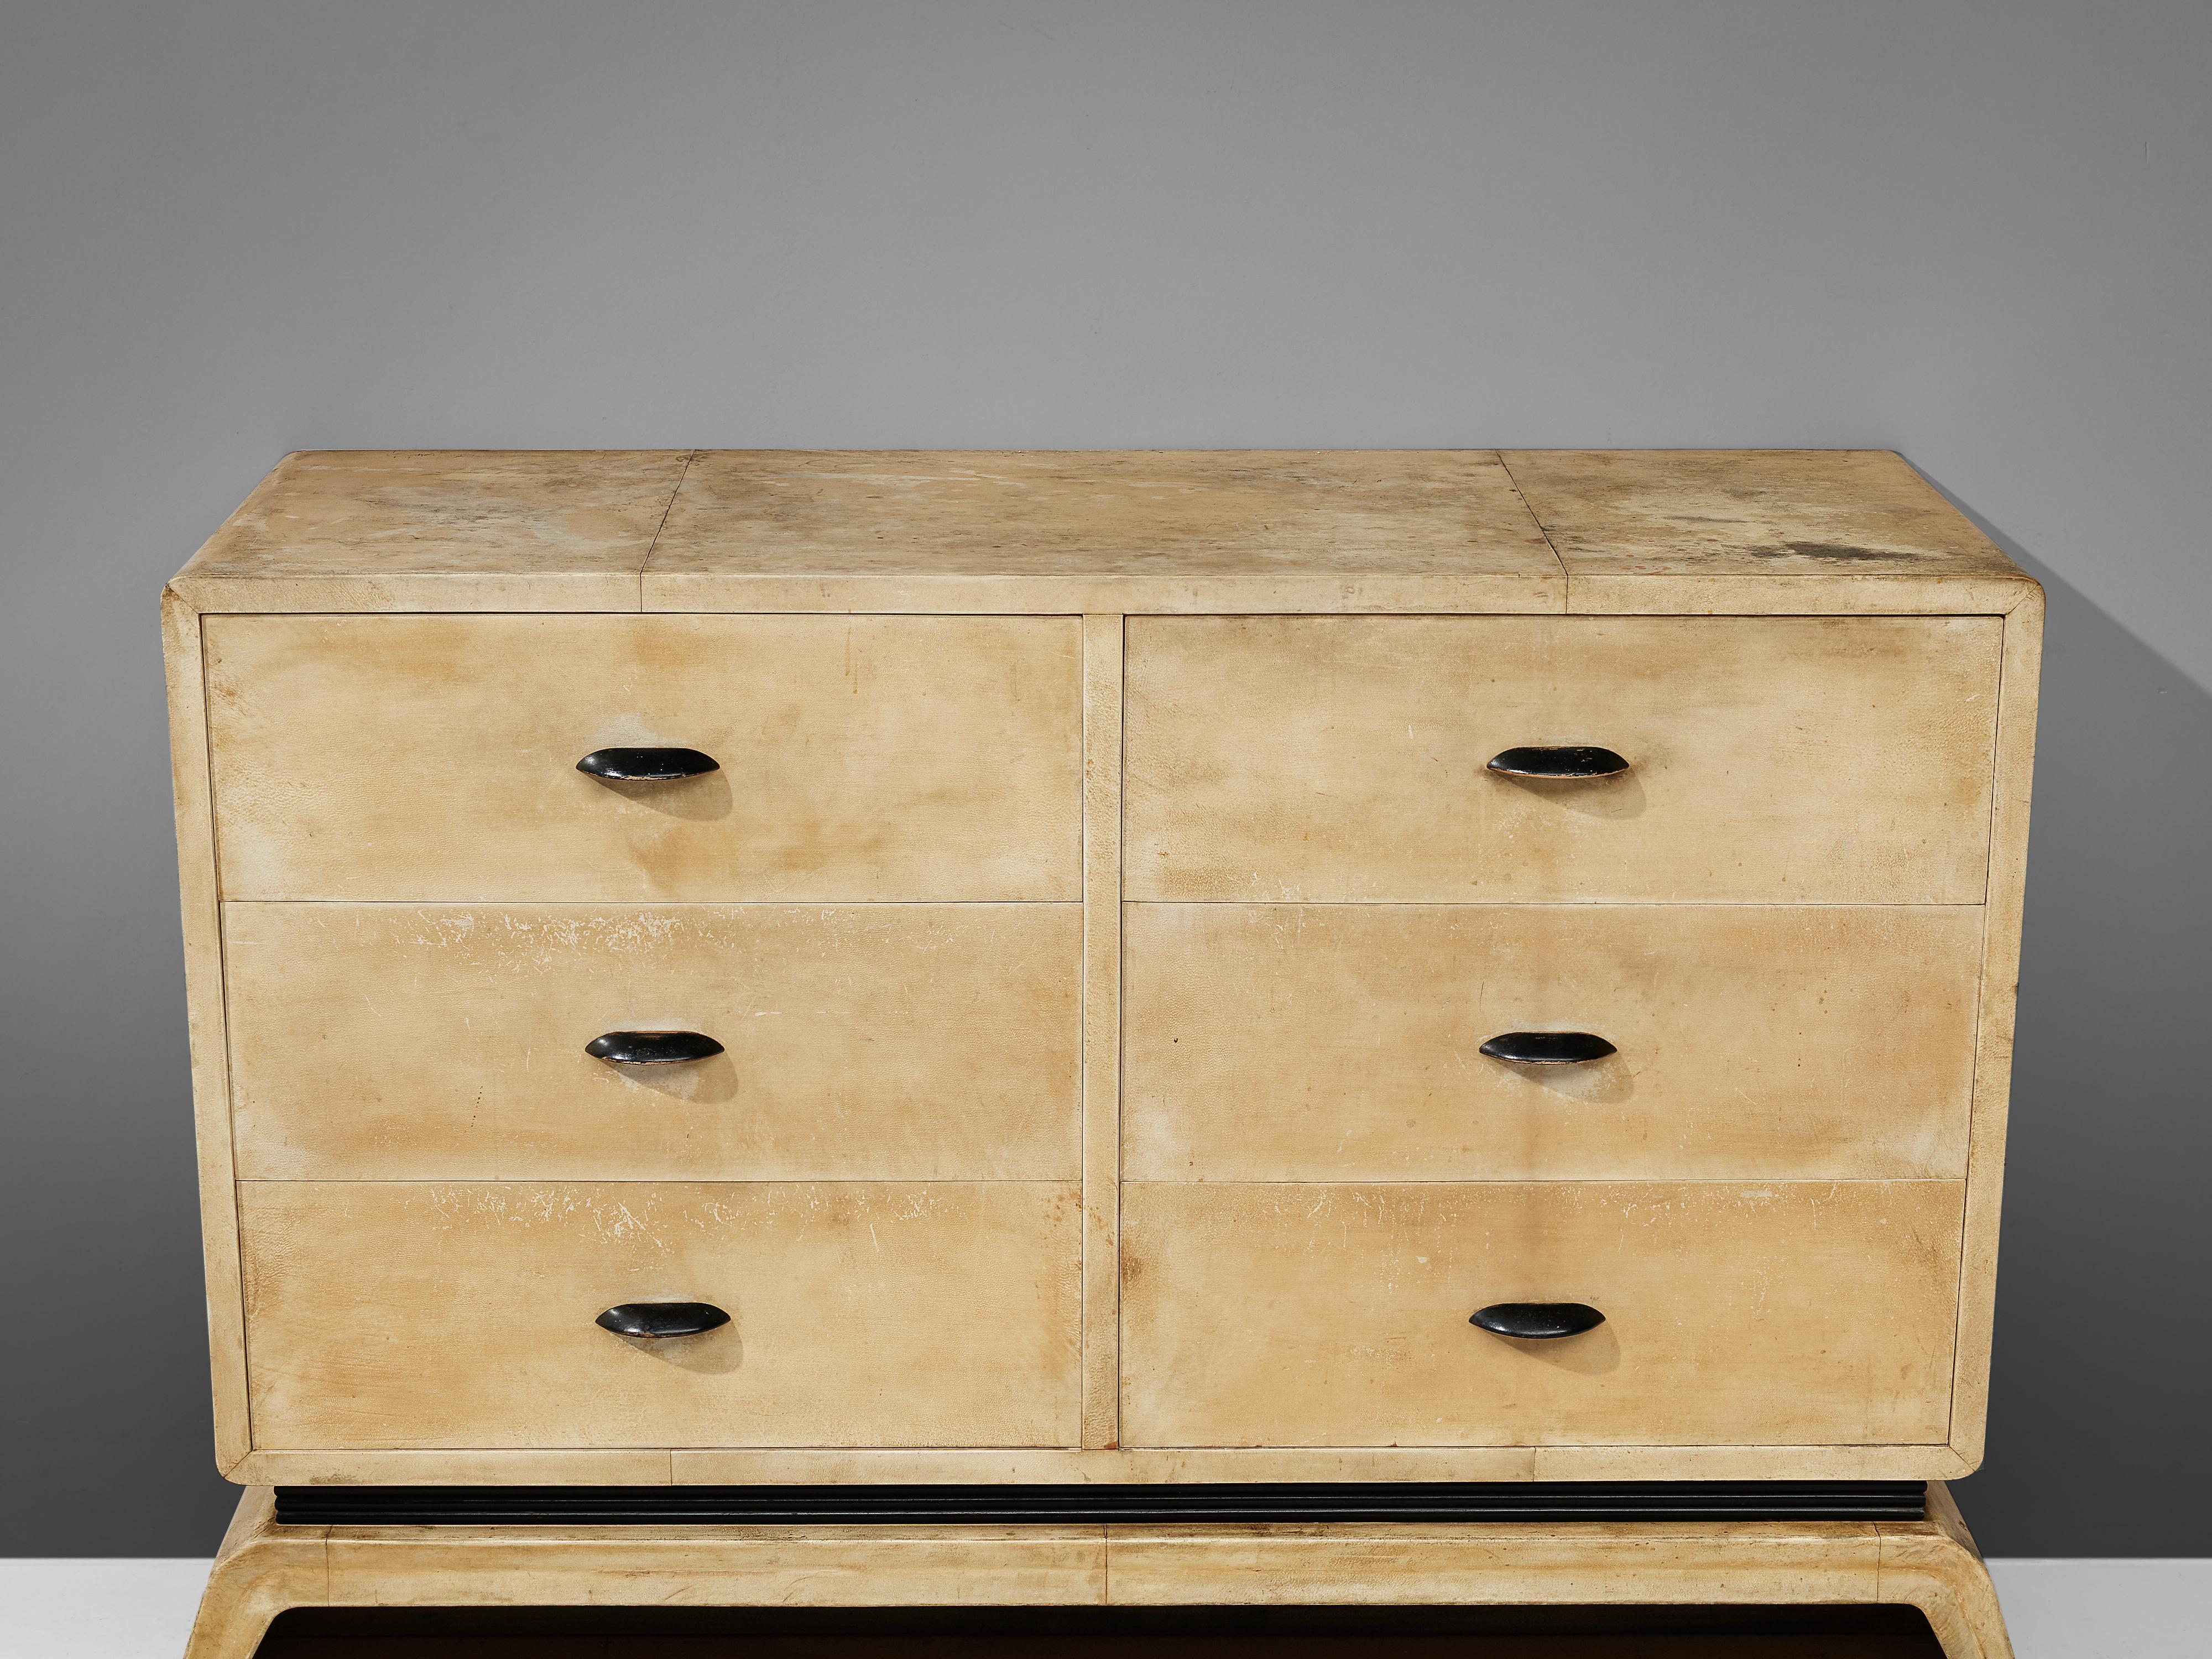 Wood Rare Valzania Sideboard wit Drawers in Parchment